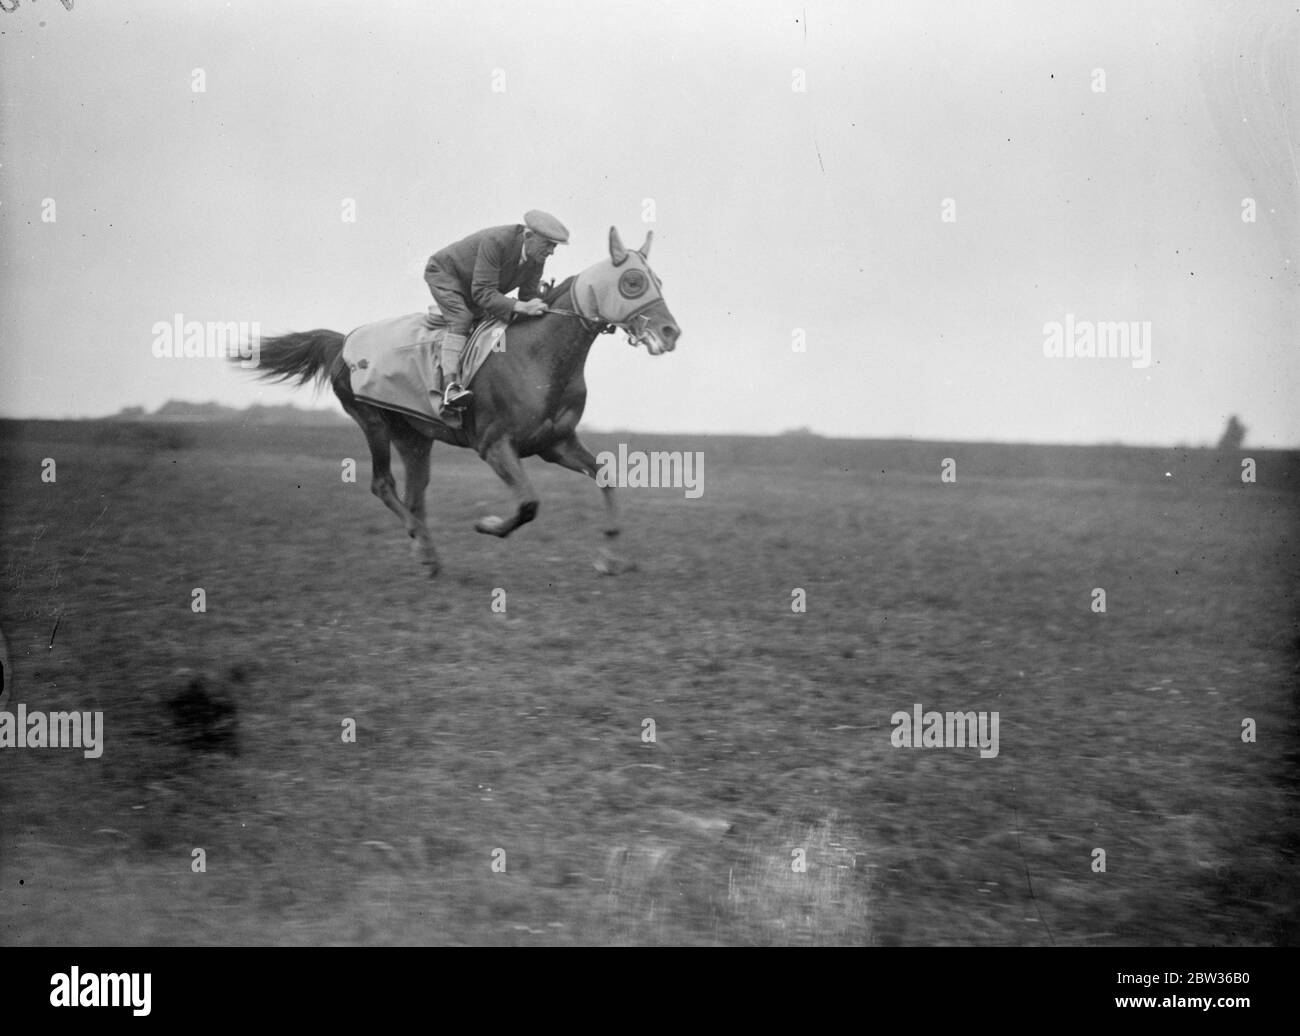 Racehorse Rodosto and rider galloping June 1933 Stock Photo